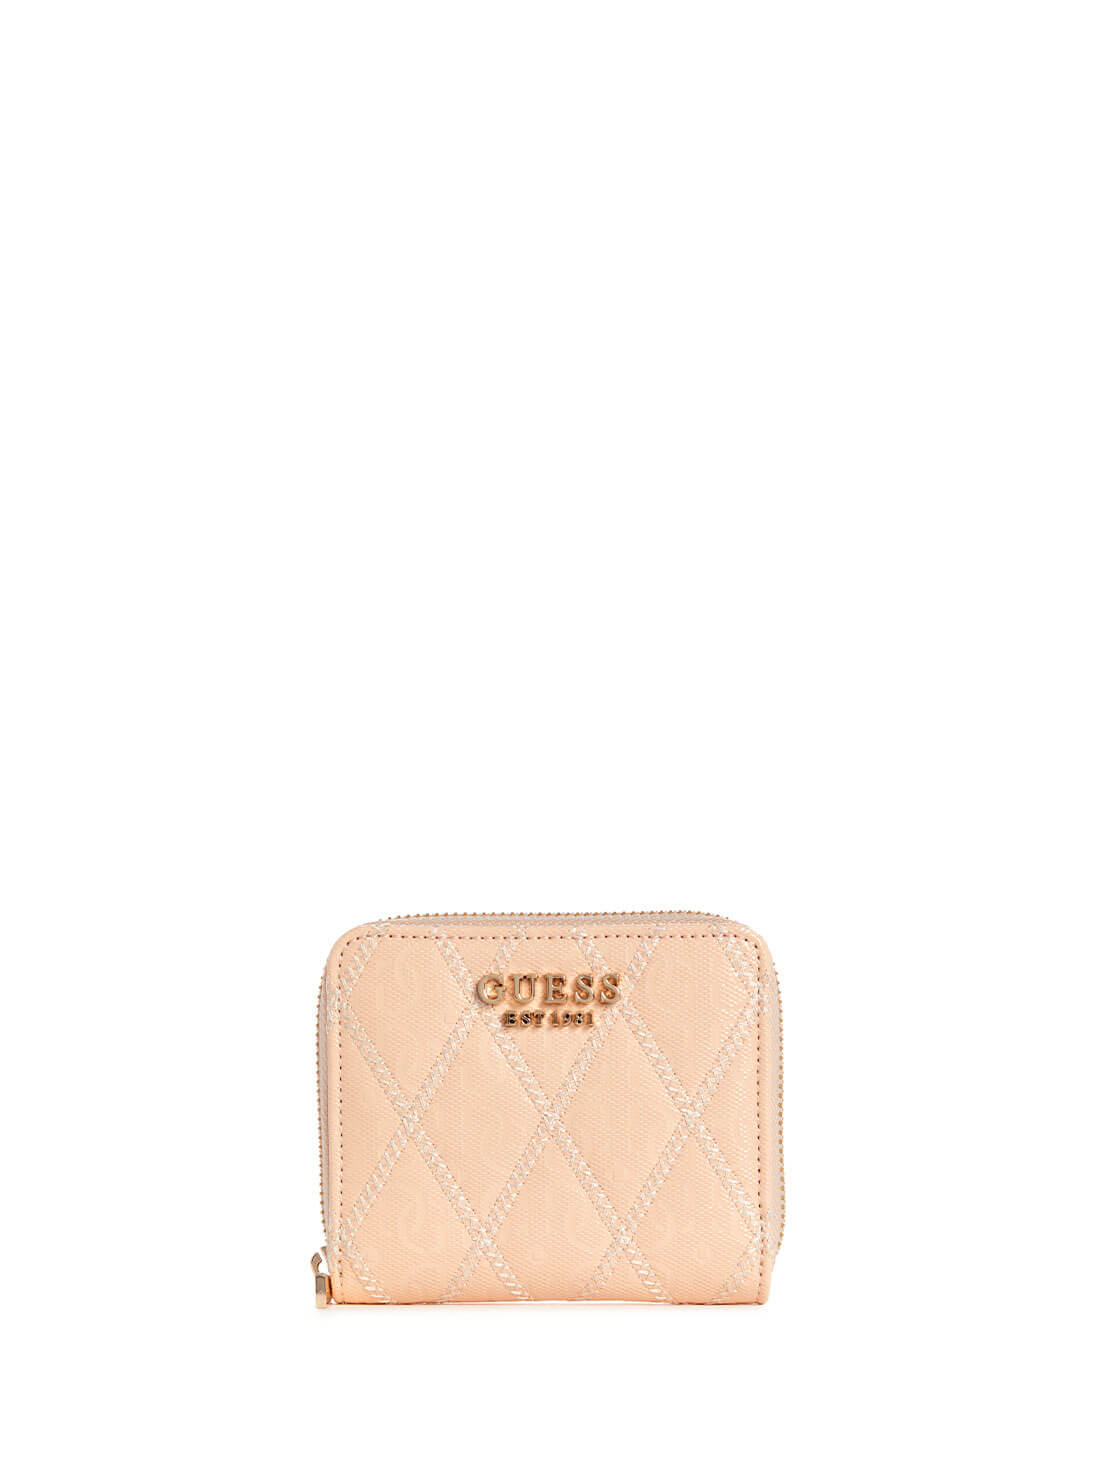 GUESS Light Peach Adi Small Wallet front view